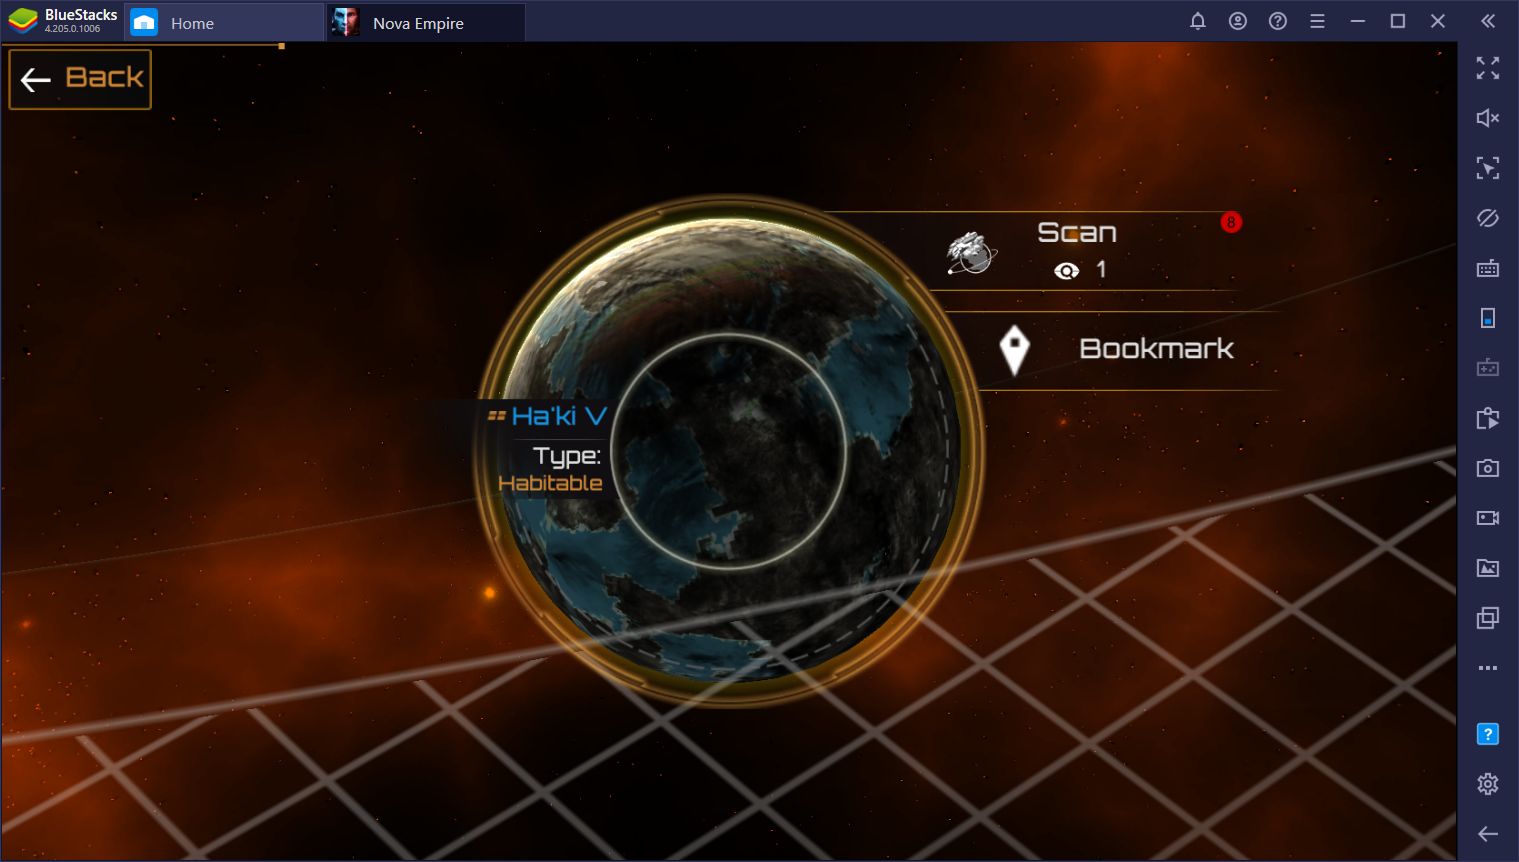 Nova Empire: Space Commander on PC - Beginner’s Guide for Dominating the Galaxy